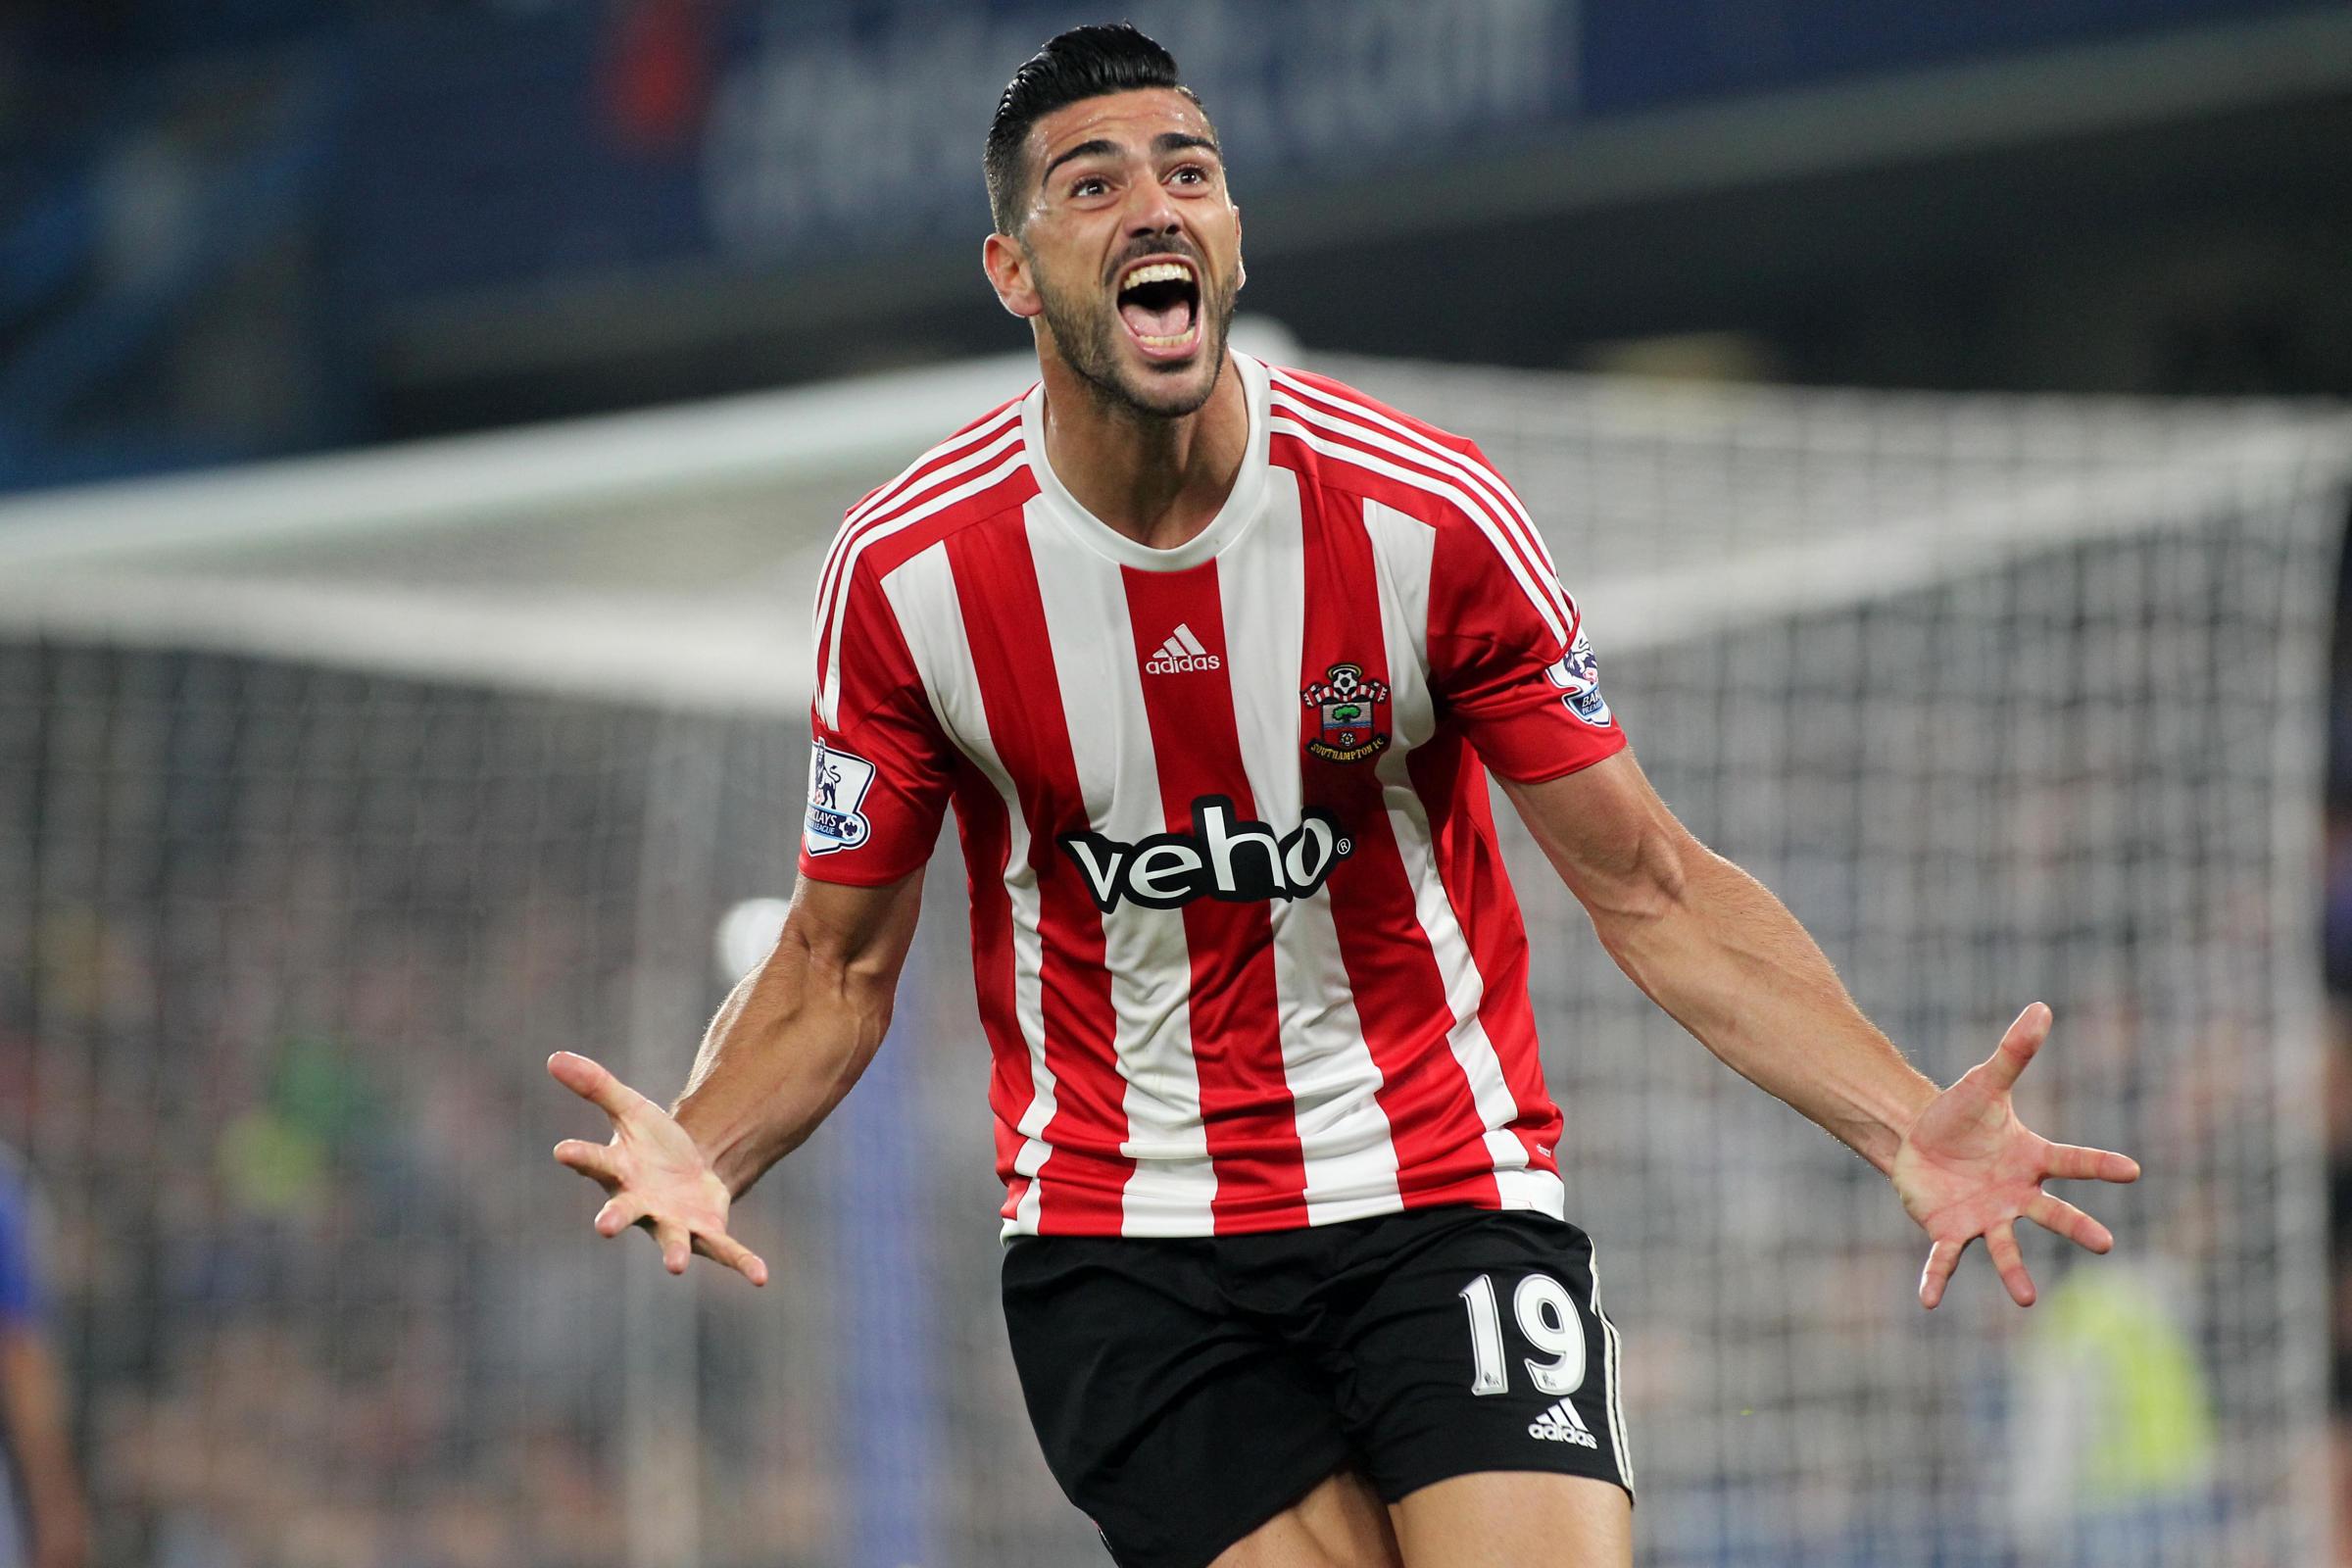 Southampton striker Graziano Pelle hoping to continue good form for Saints and Italy | Daily Echo